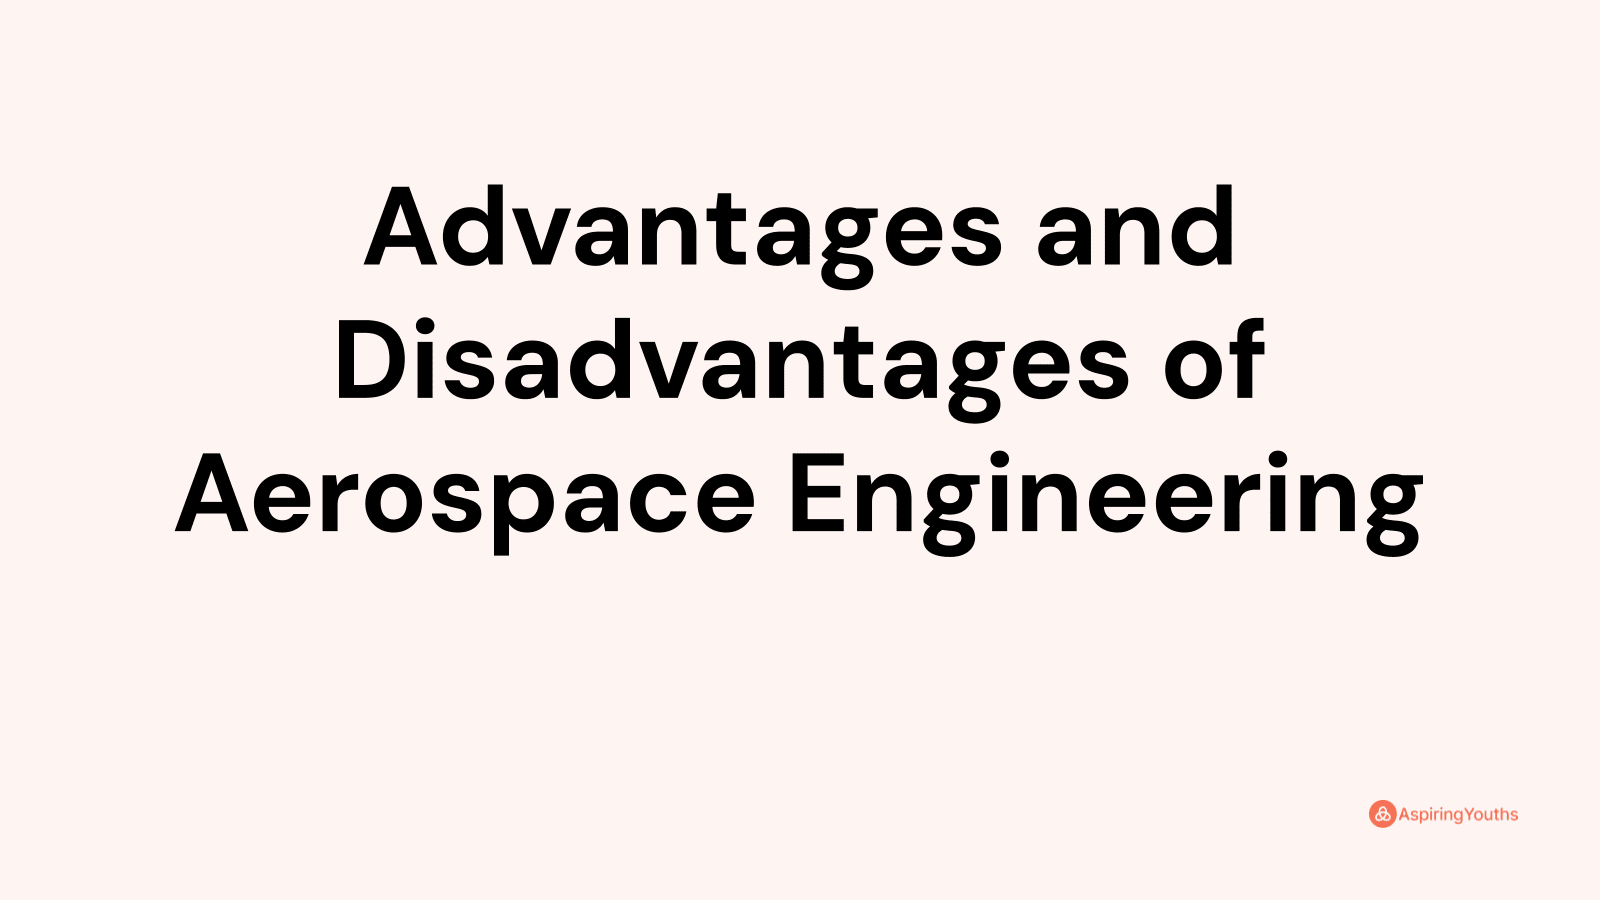 Advantages and disadvantages of Aerospace Engineering